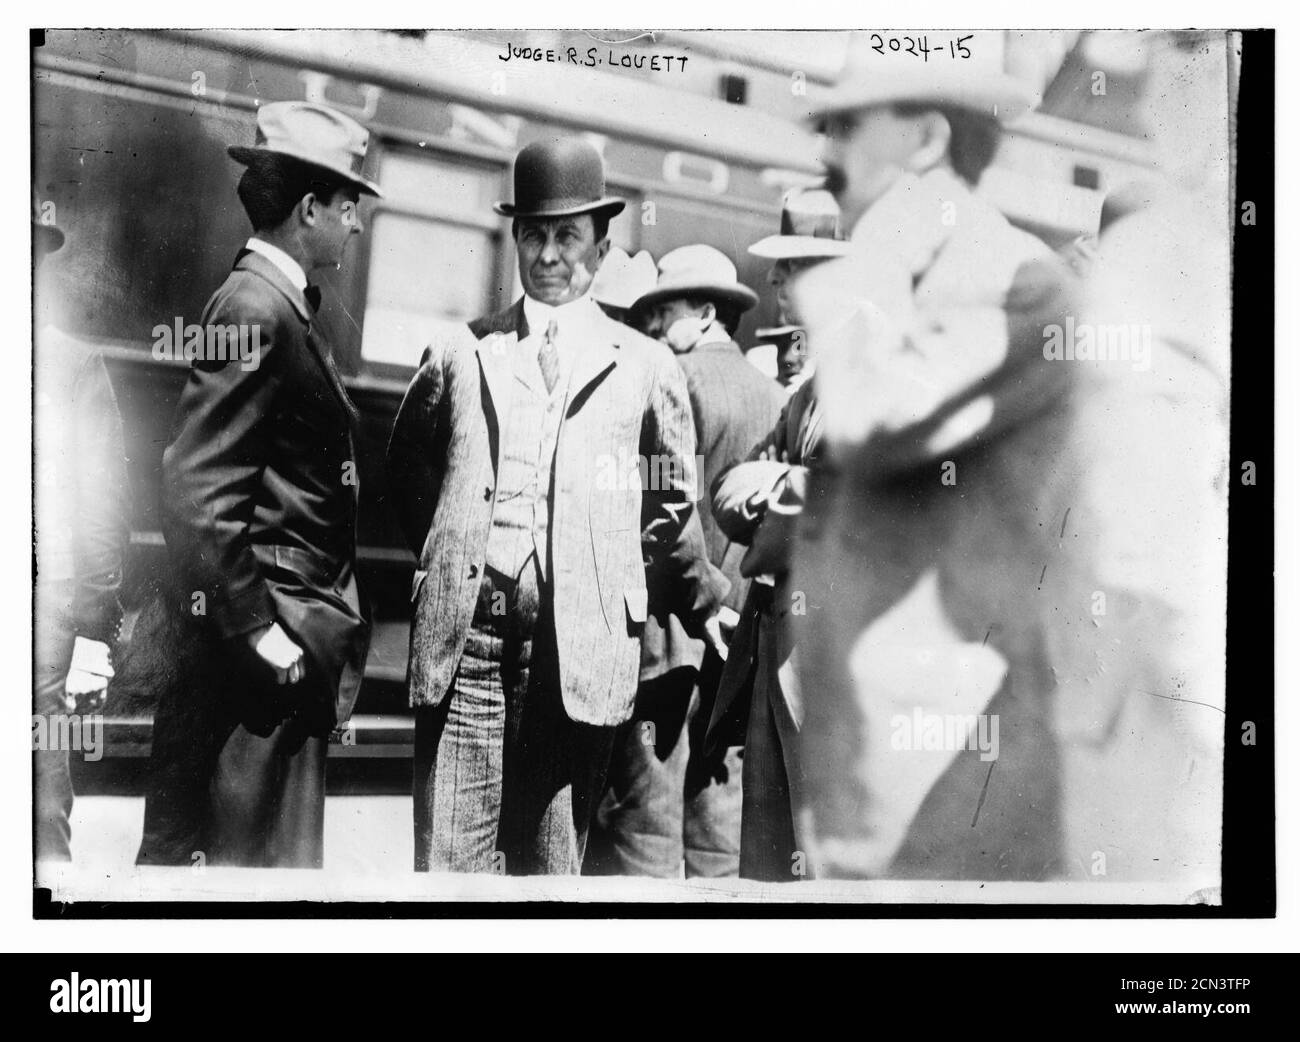 Judge R.S. Louett; Three-quarter view of Louett standing with a group of men in front of train Stock Photo